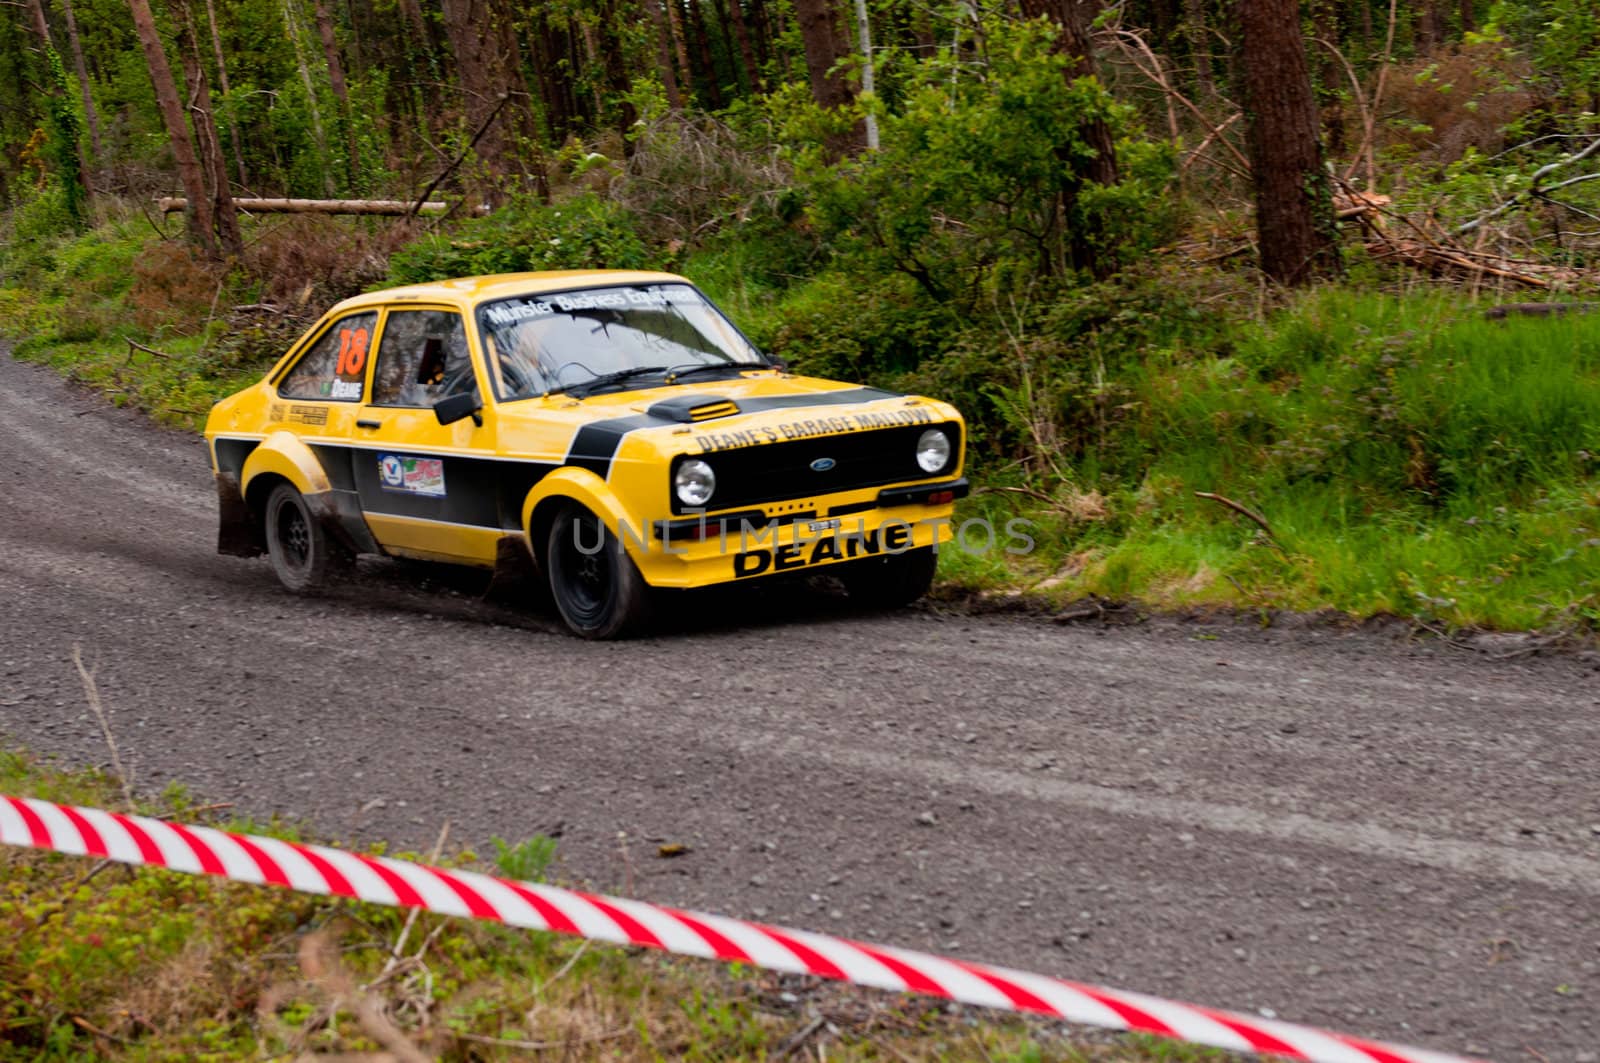 J. Deane driving Ford Escort by luissantos84